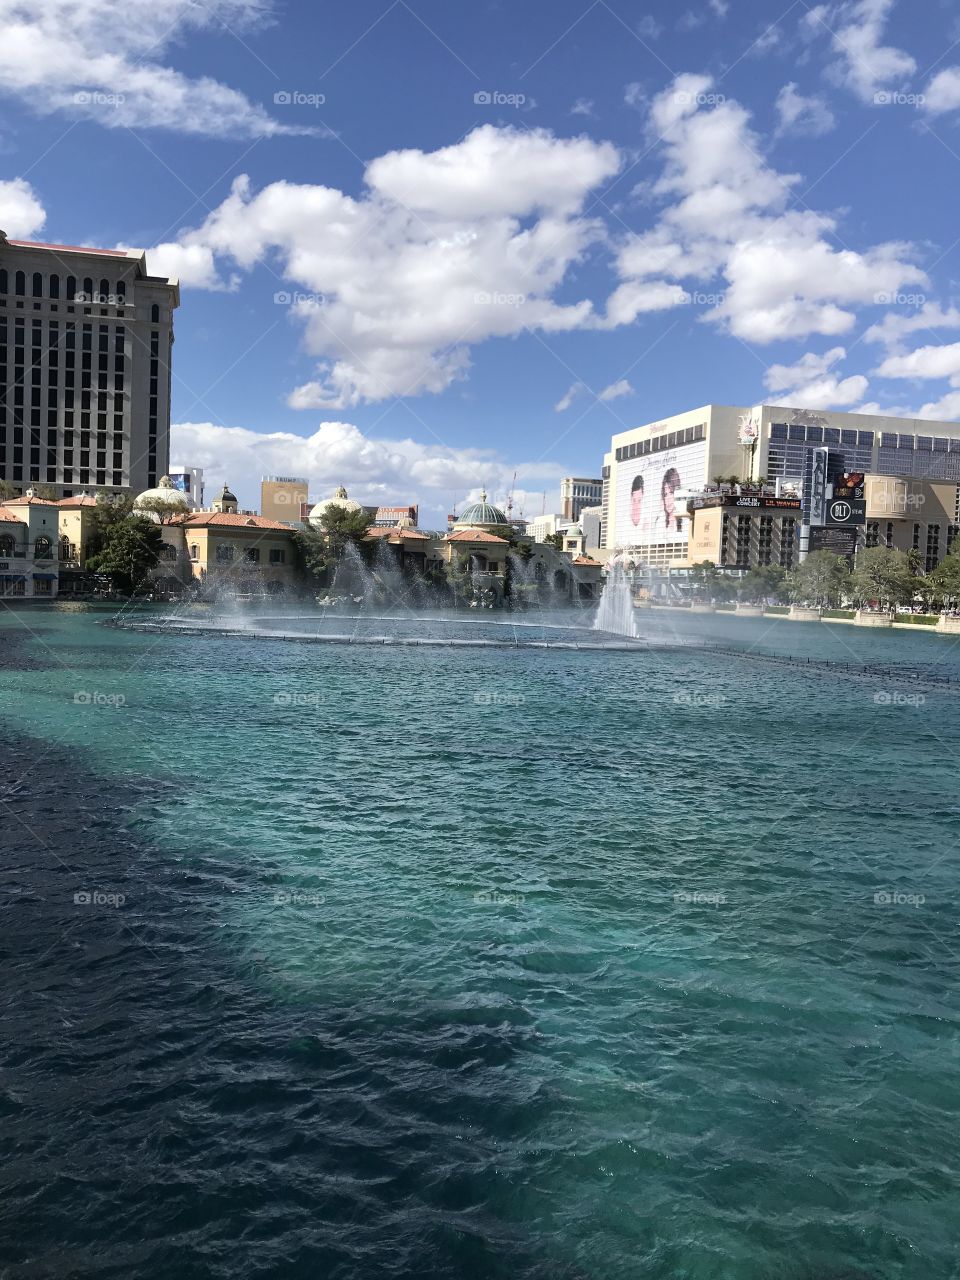 Enjoyed a nice walk on the Vegas strip. How beautiful is the water in front of the Bellagio!?